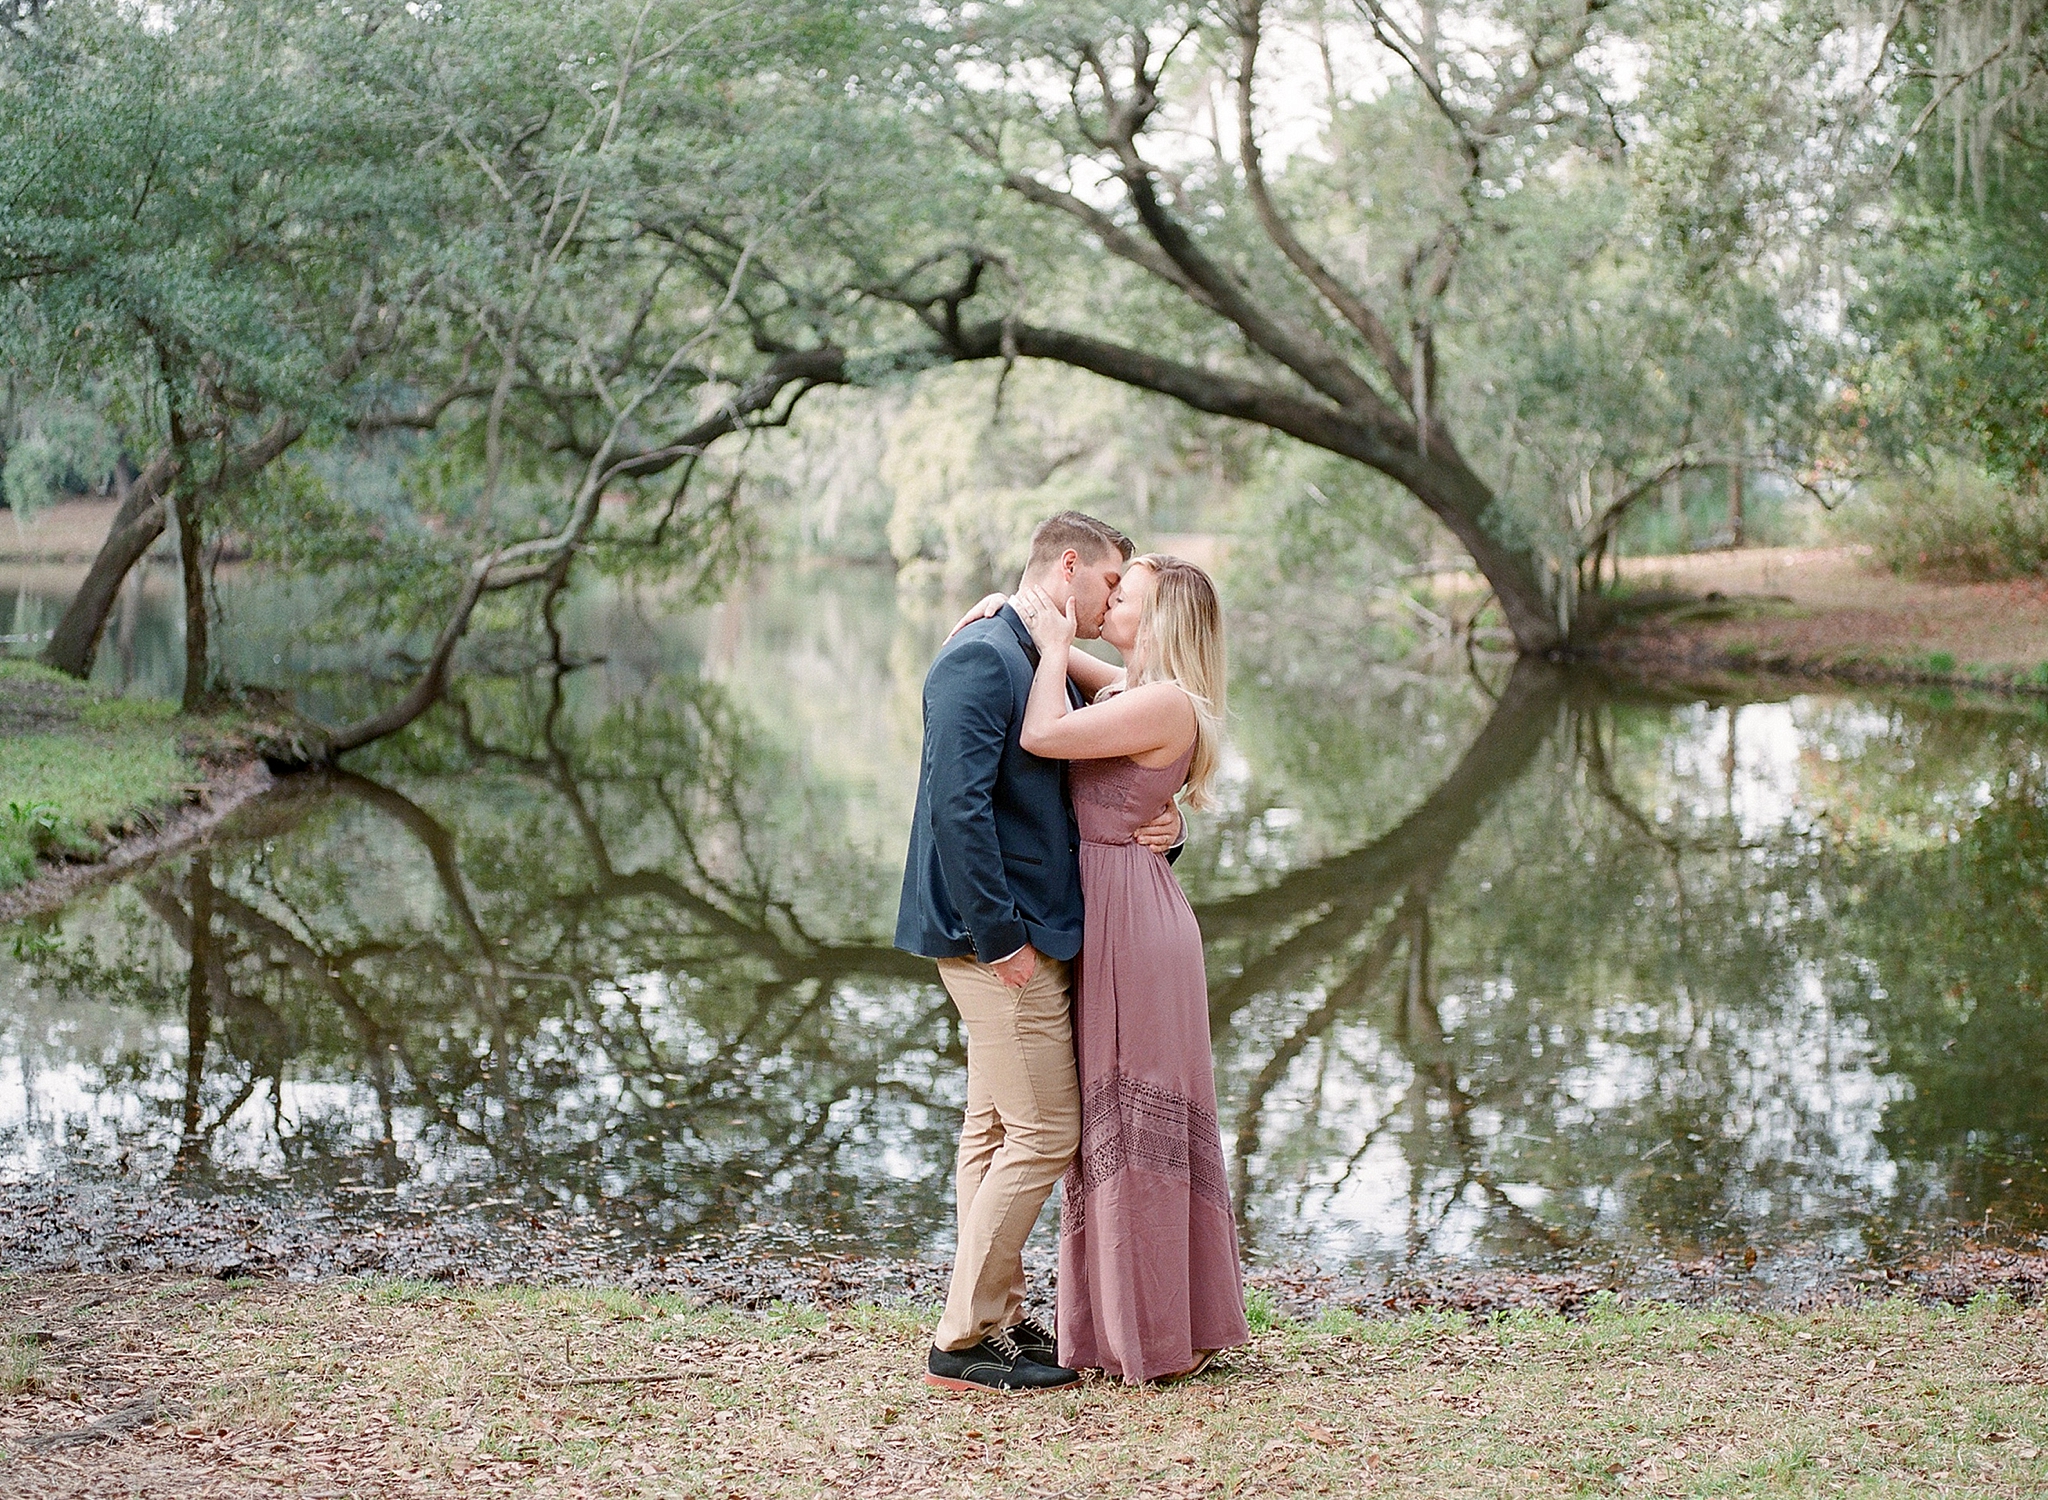 A romantic anniversary session is photographed at the historic wedding venue of Legare Waring House in Charleston, SC